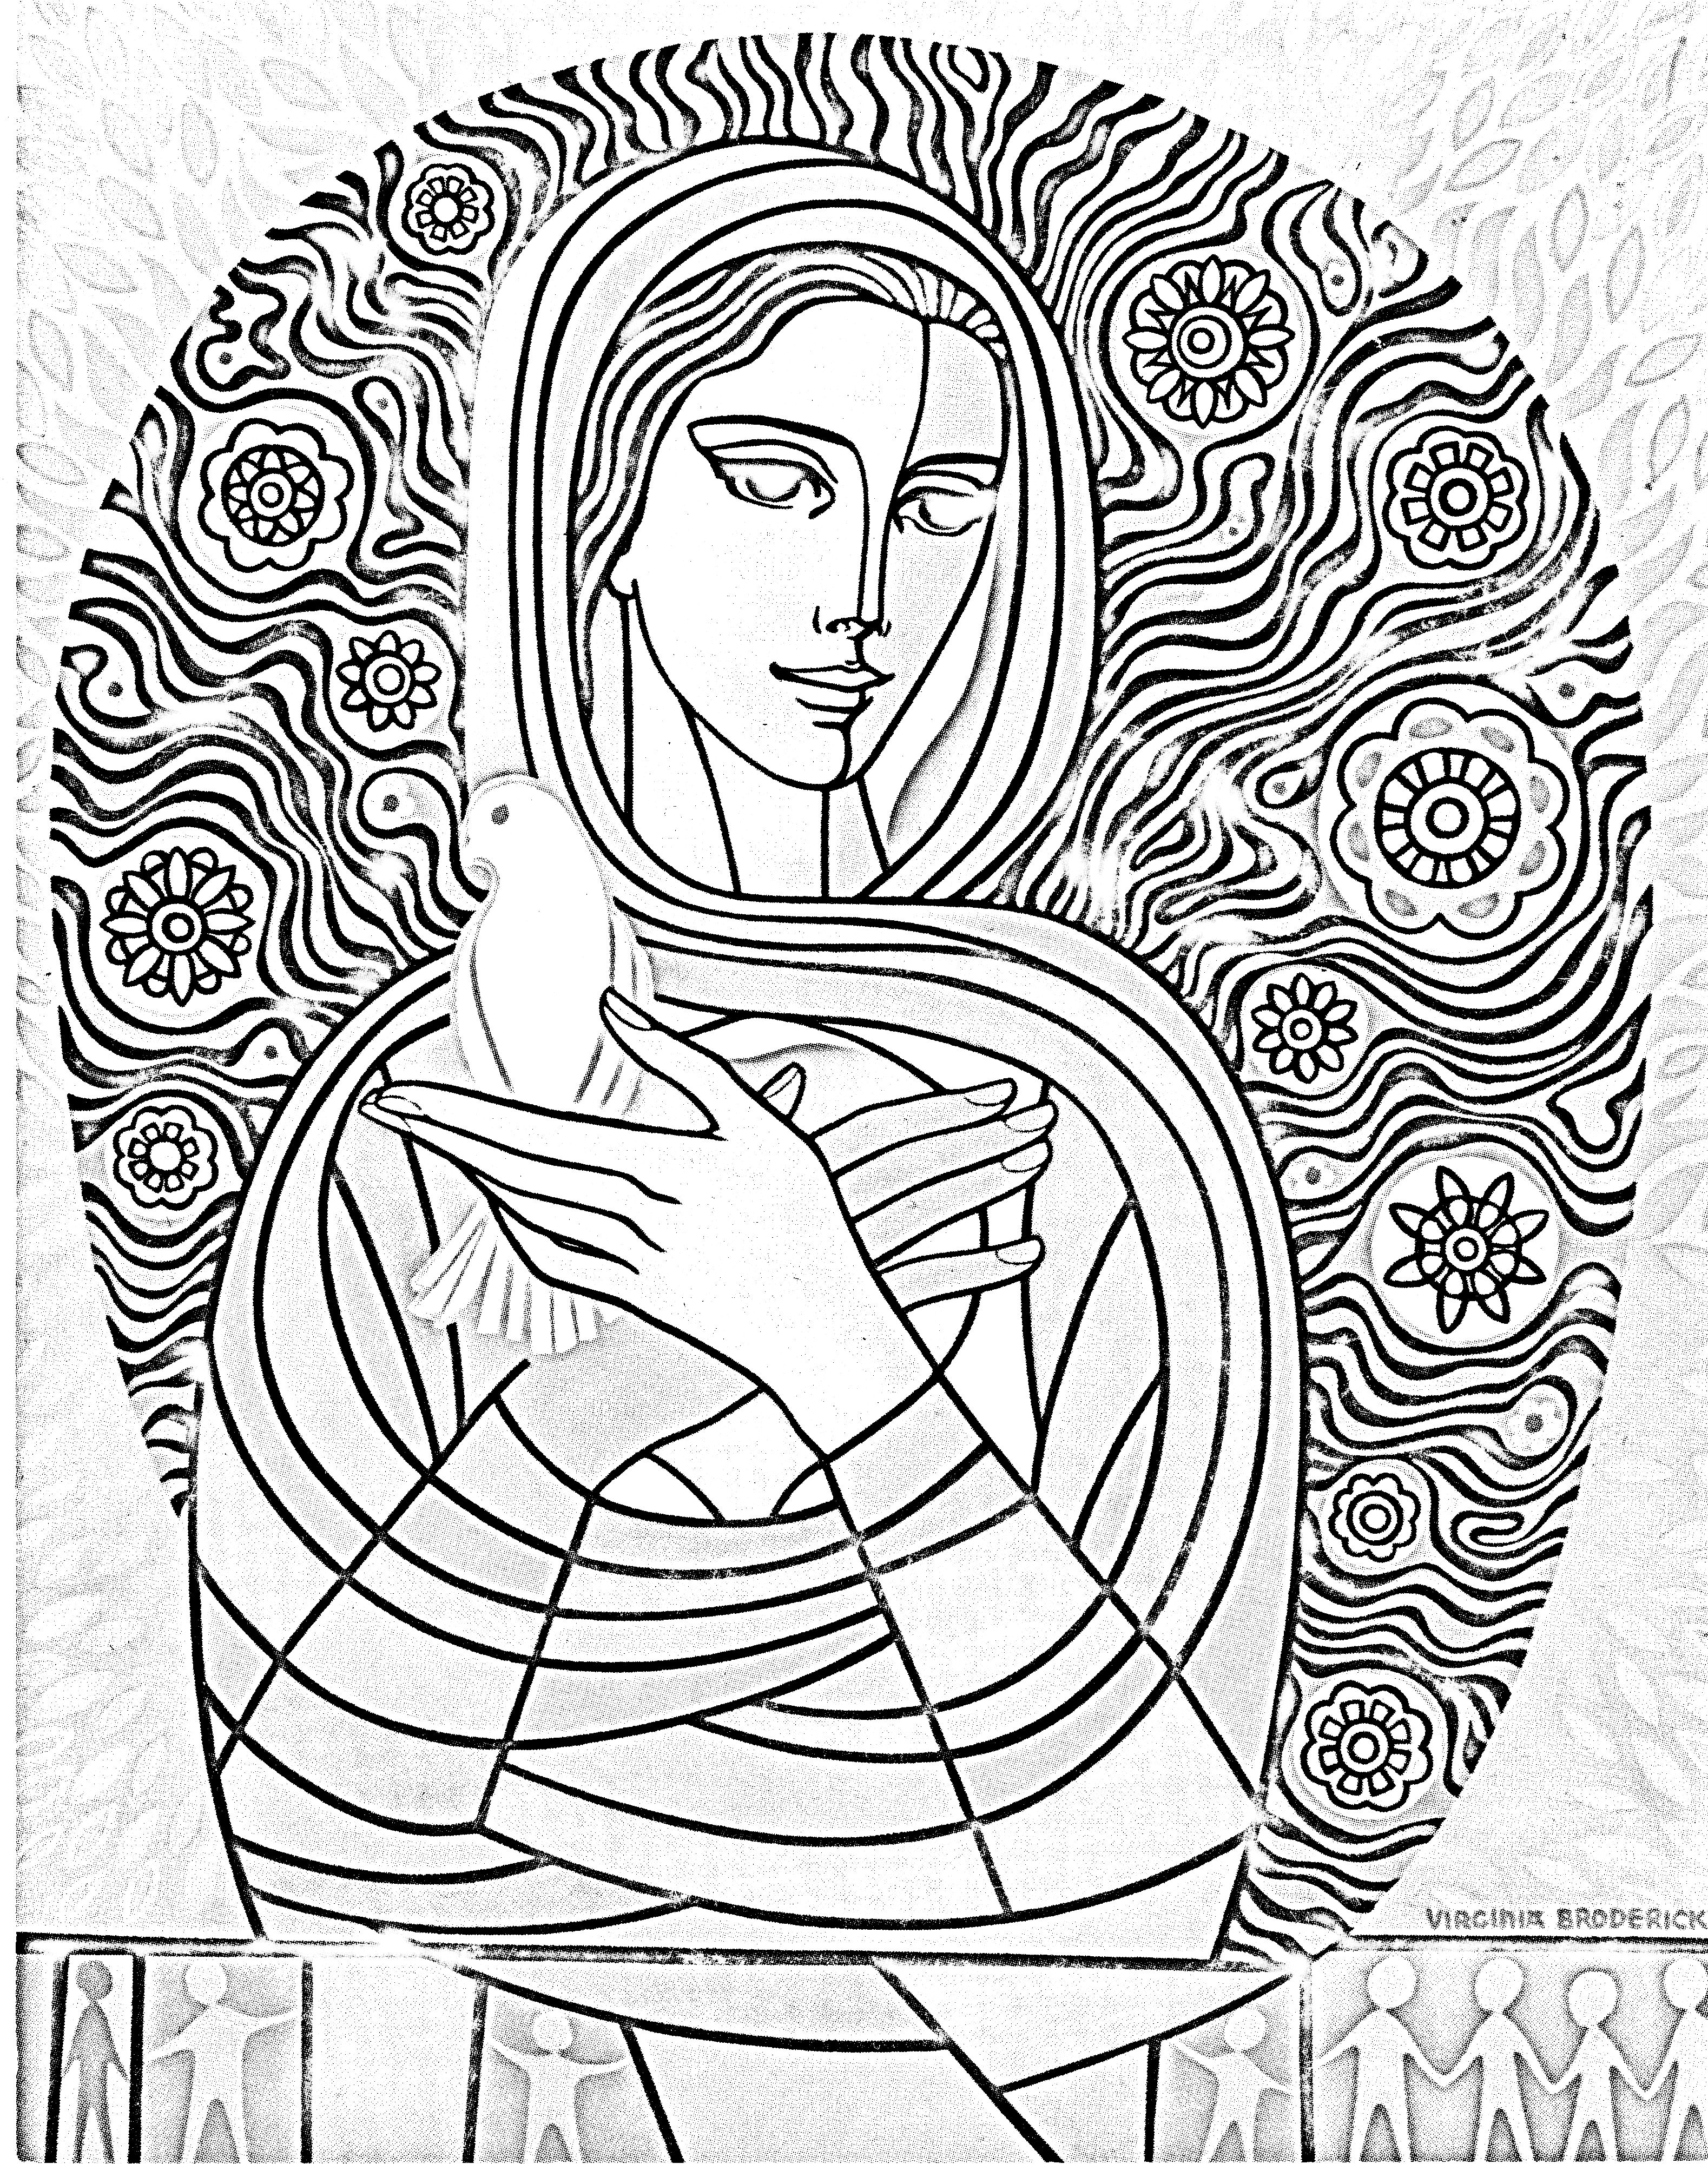 Virginia Broderick coloring page